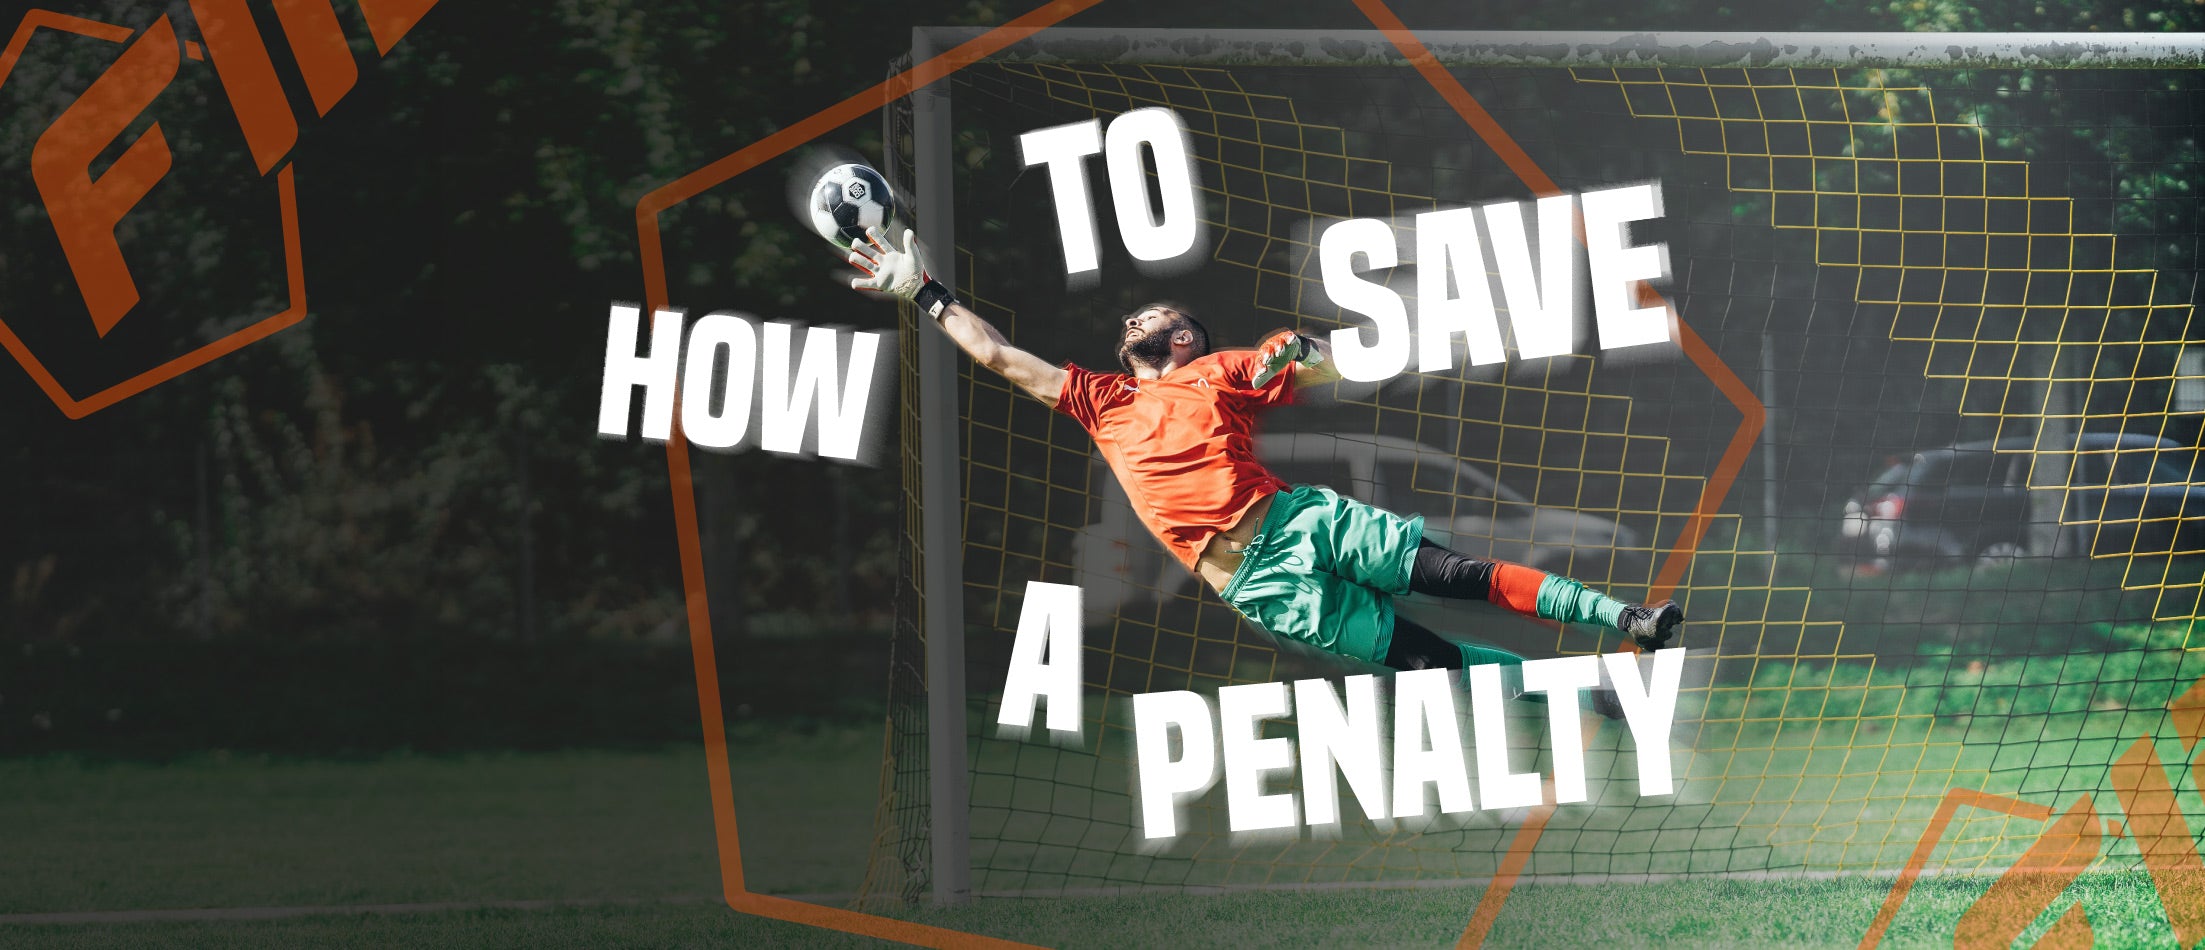 HOW TO SAVE A PENALTY  GUERRERO CUP #7 FUTSAL 